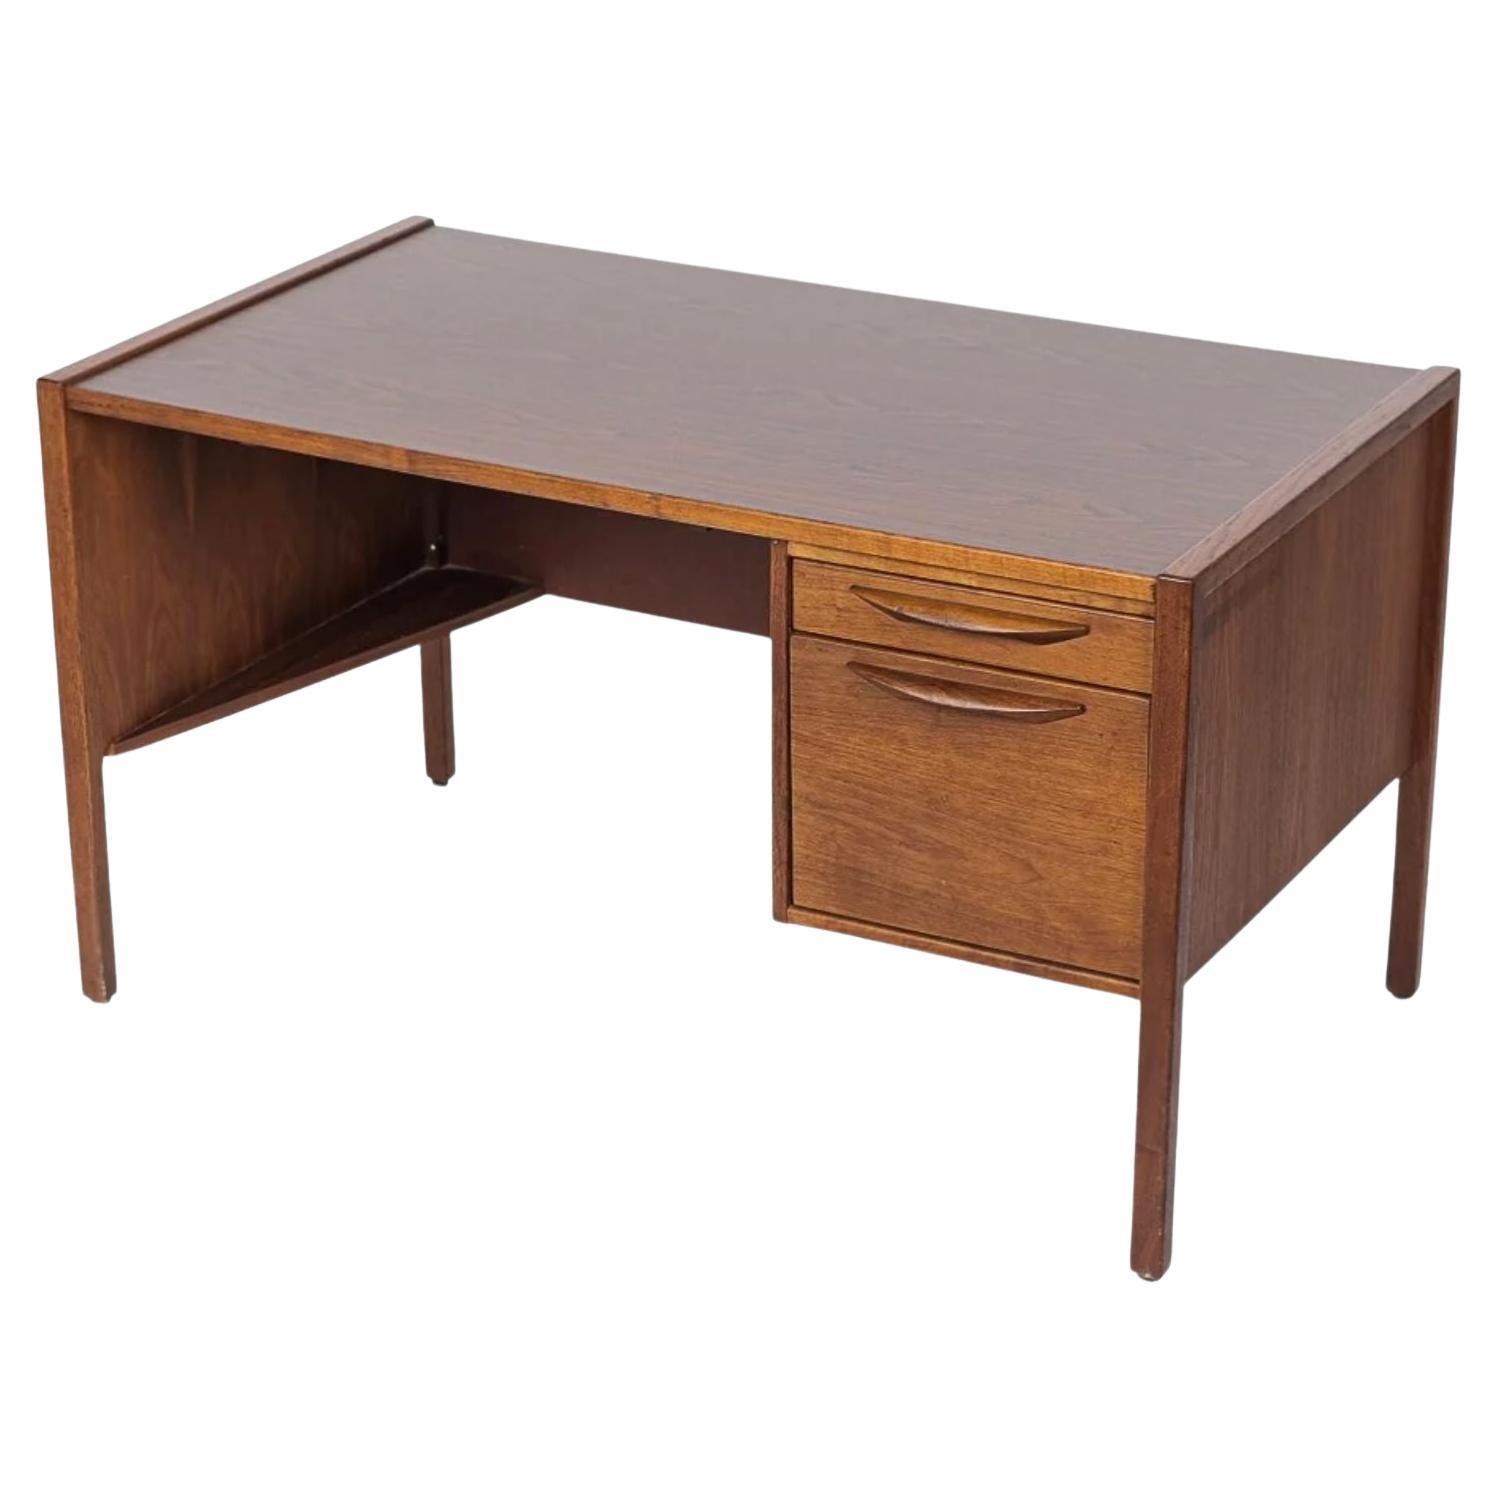 1960s Midcentury Desk in Wood & Laminate by Jens Risom For Sale